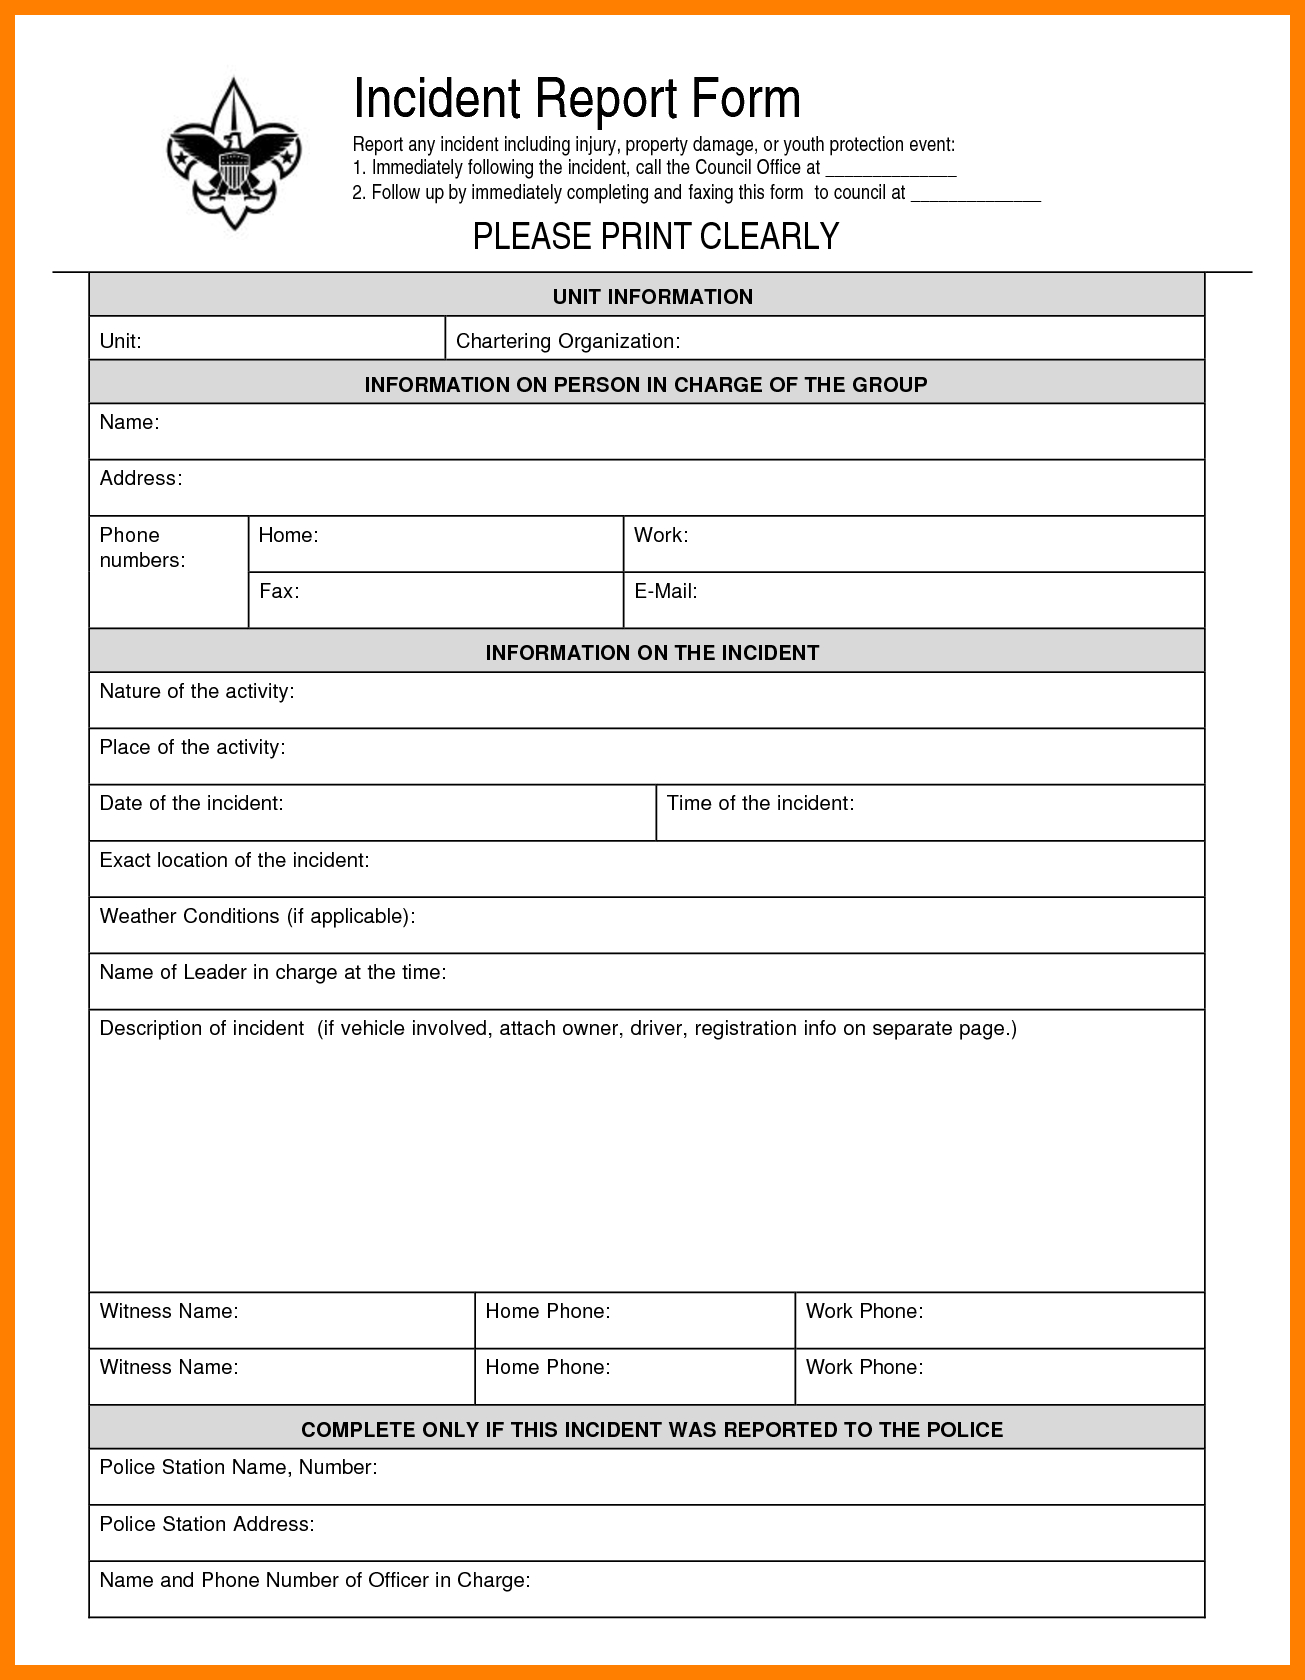 Incident Report E Word Employee Form Jpg Wordlate Image With Regard To Incident Report Log Template